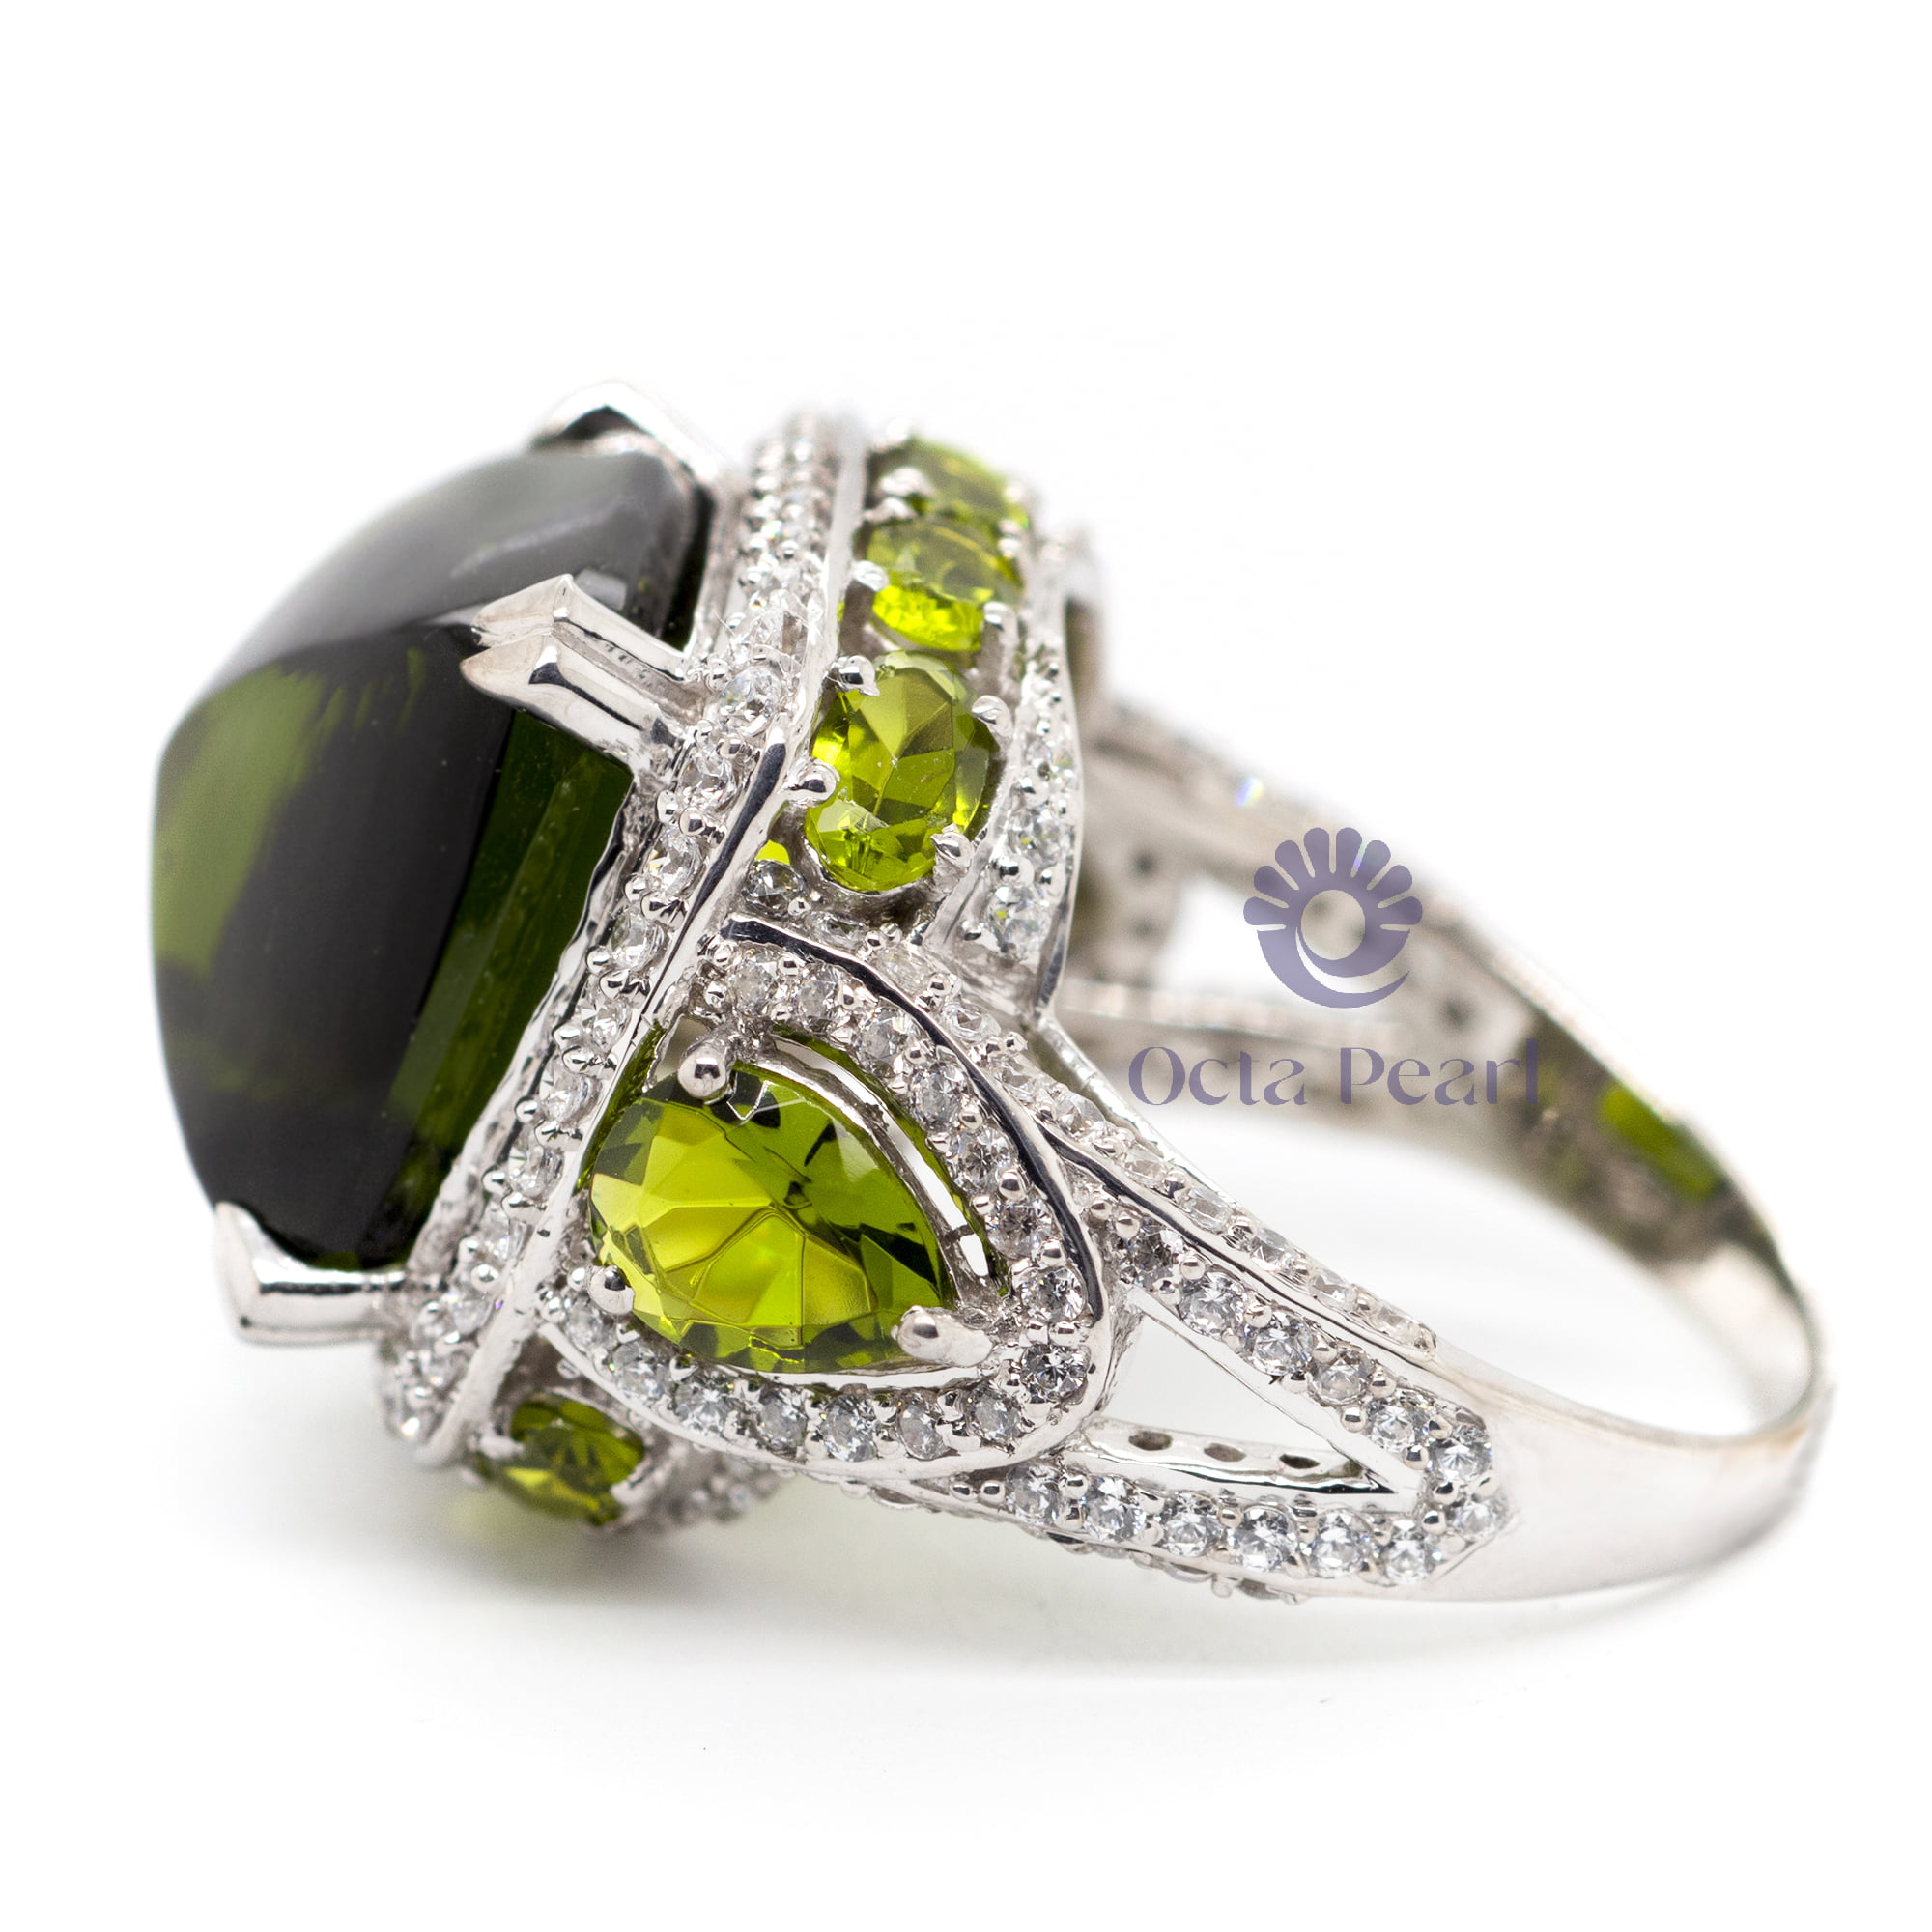 Peridot Color Fancy Cushion Shape Cabochon With Pear Cut CZ Stone Three Stone Halo Cocktail Ring